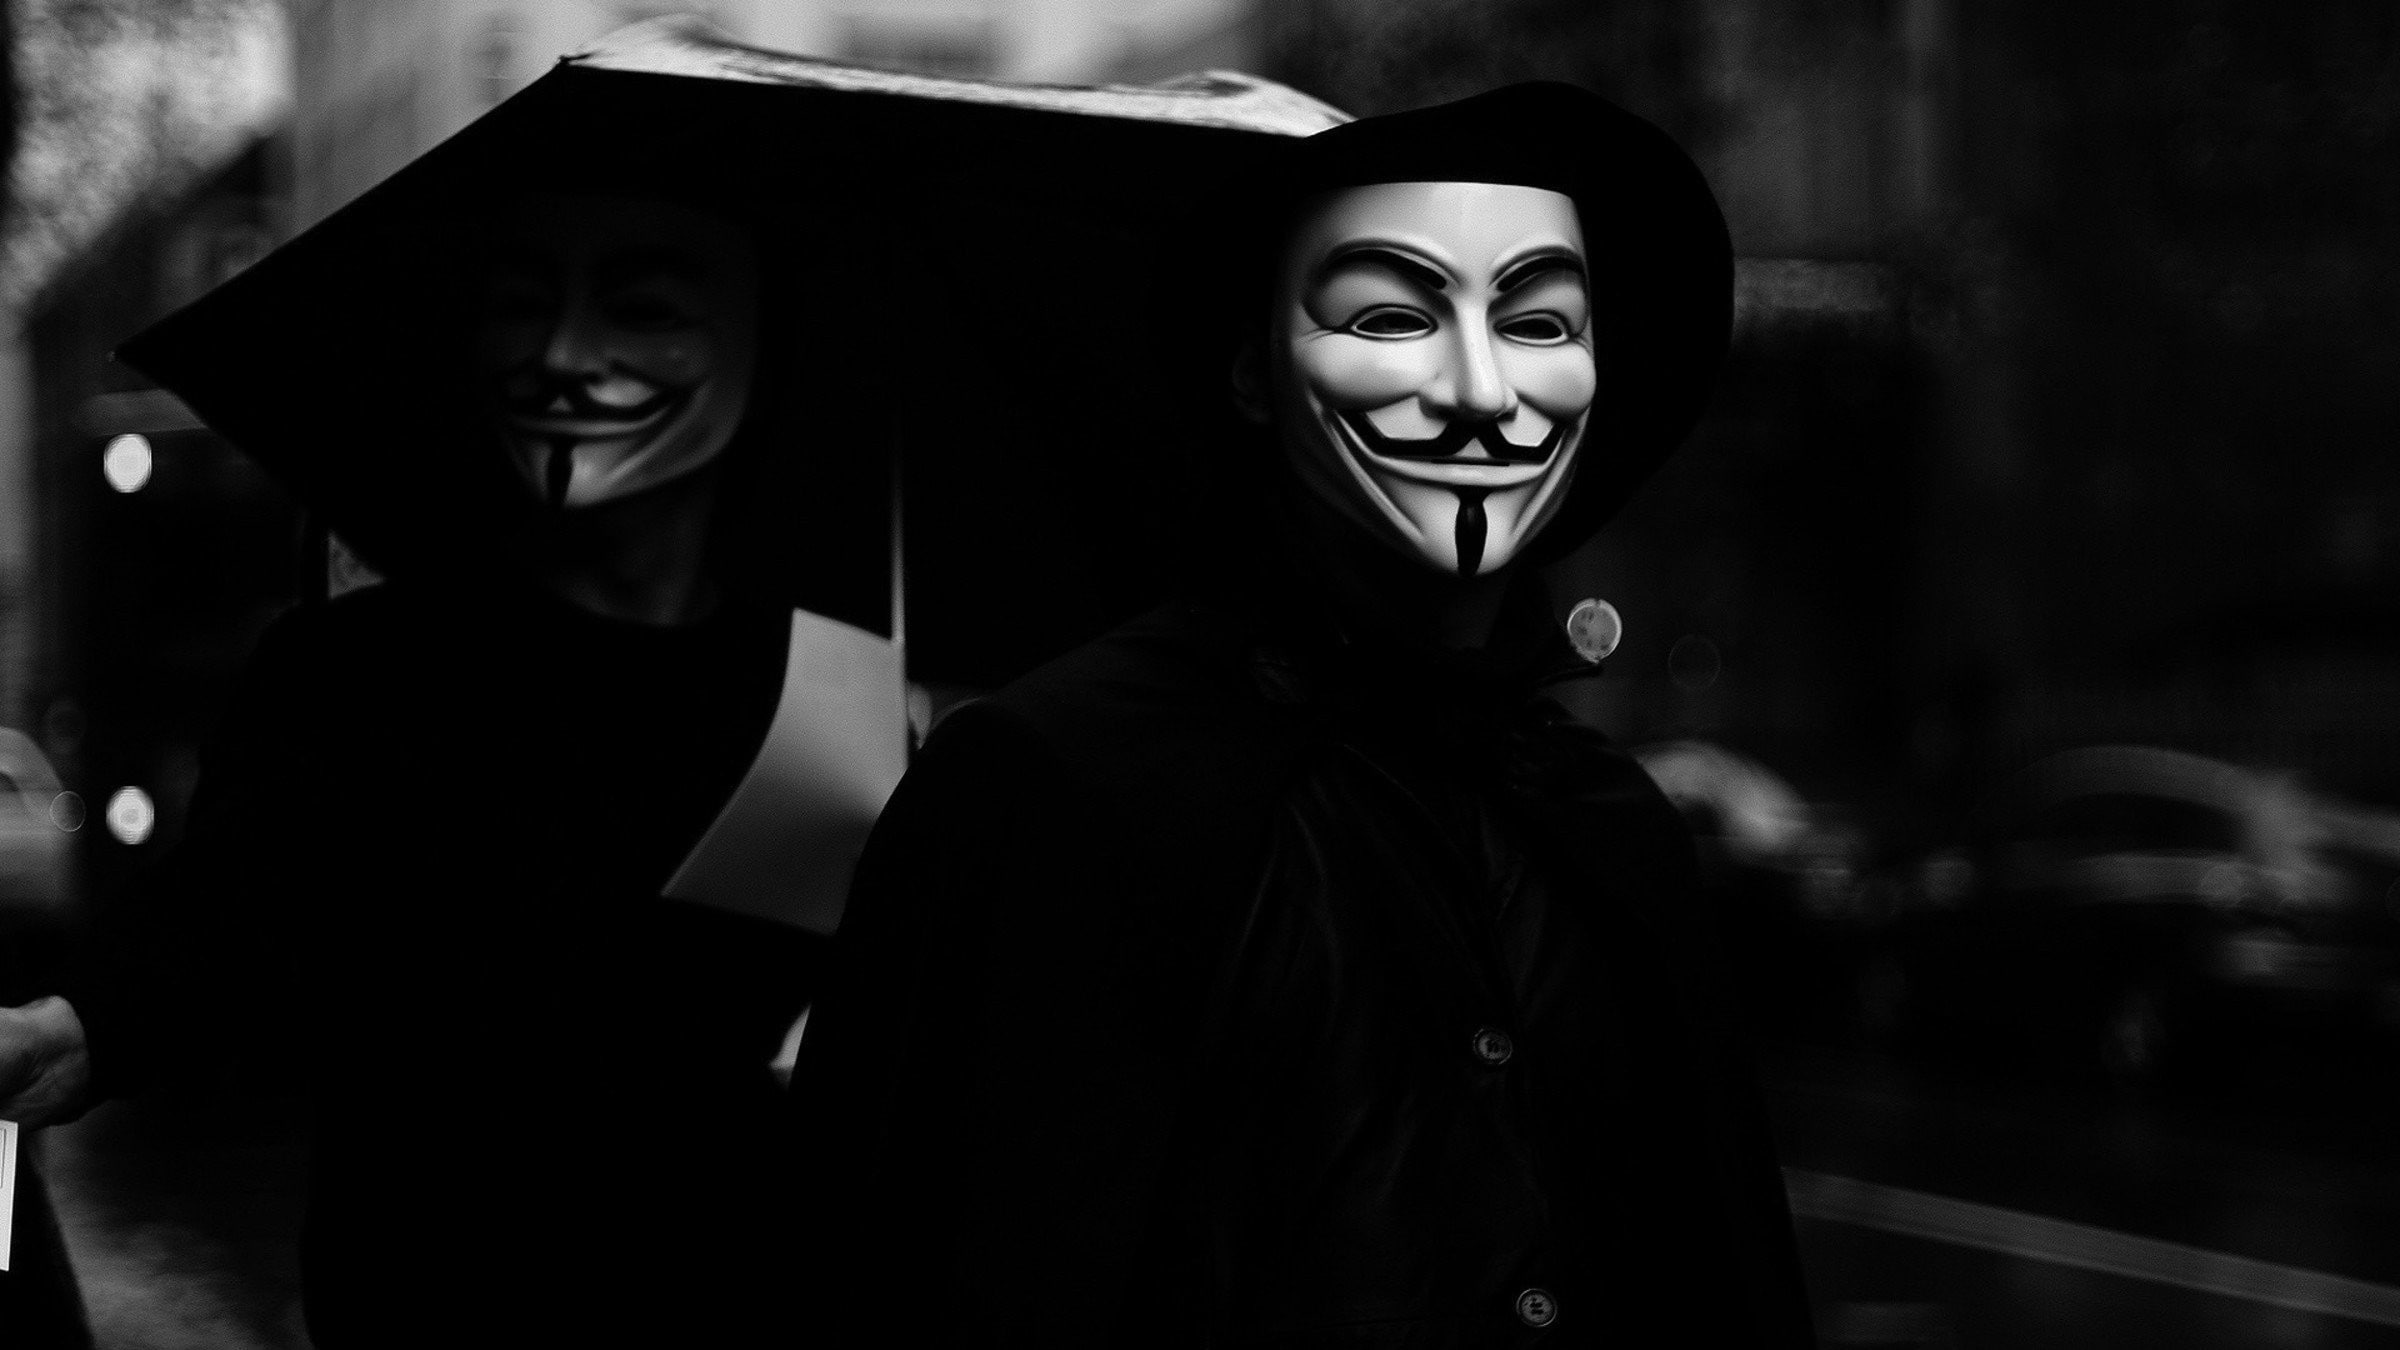 anonymous wallpaper hd for android